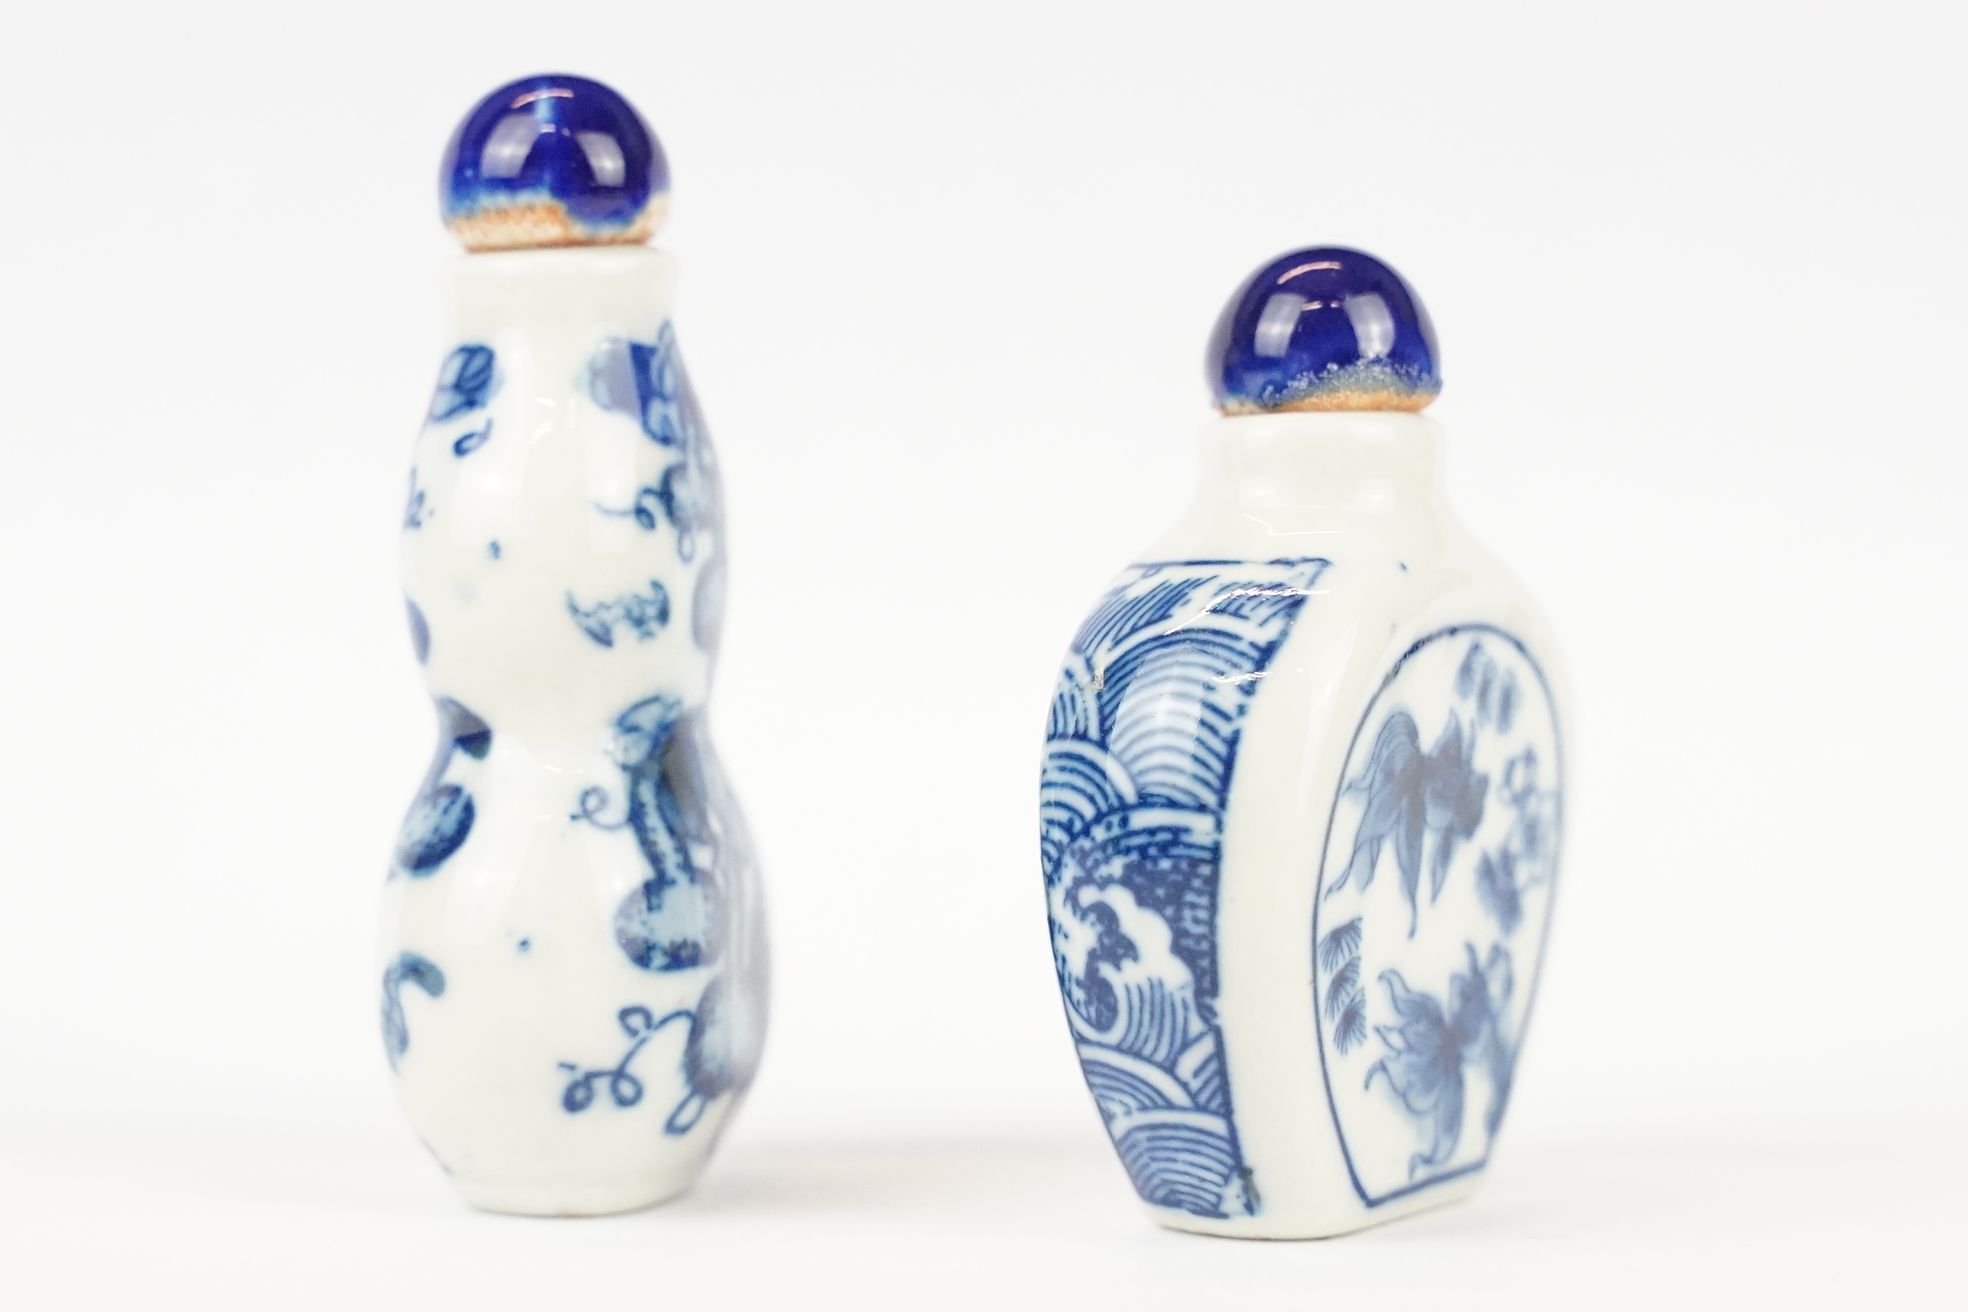 Two Chinese blue and white ceramic snuff bottles with traditional Chinese decoration. - Image 4 of 8